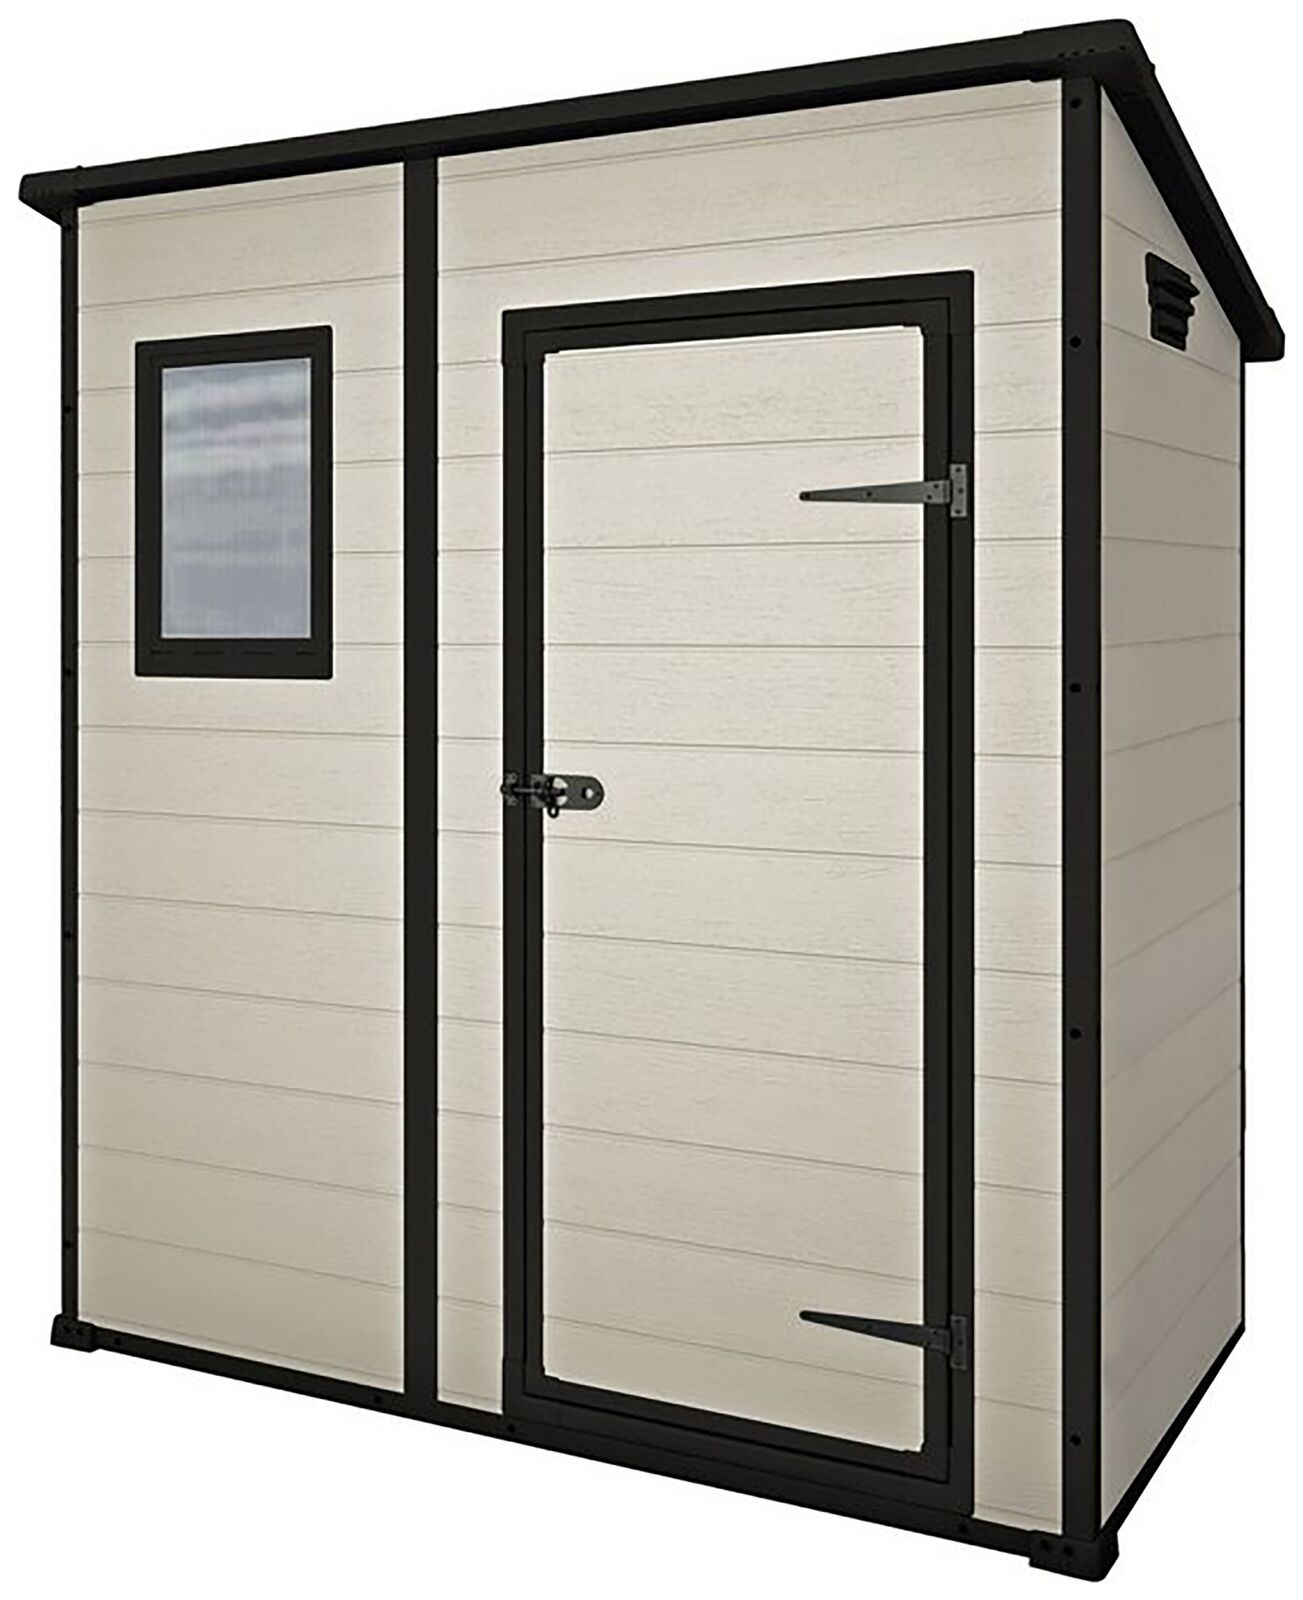 KETER MANOR SHED 6X4FT BEIGE